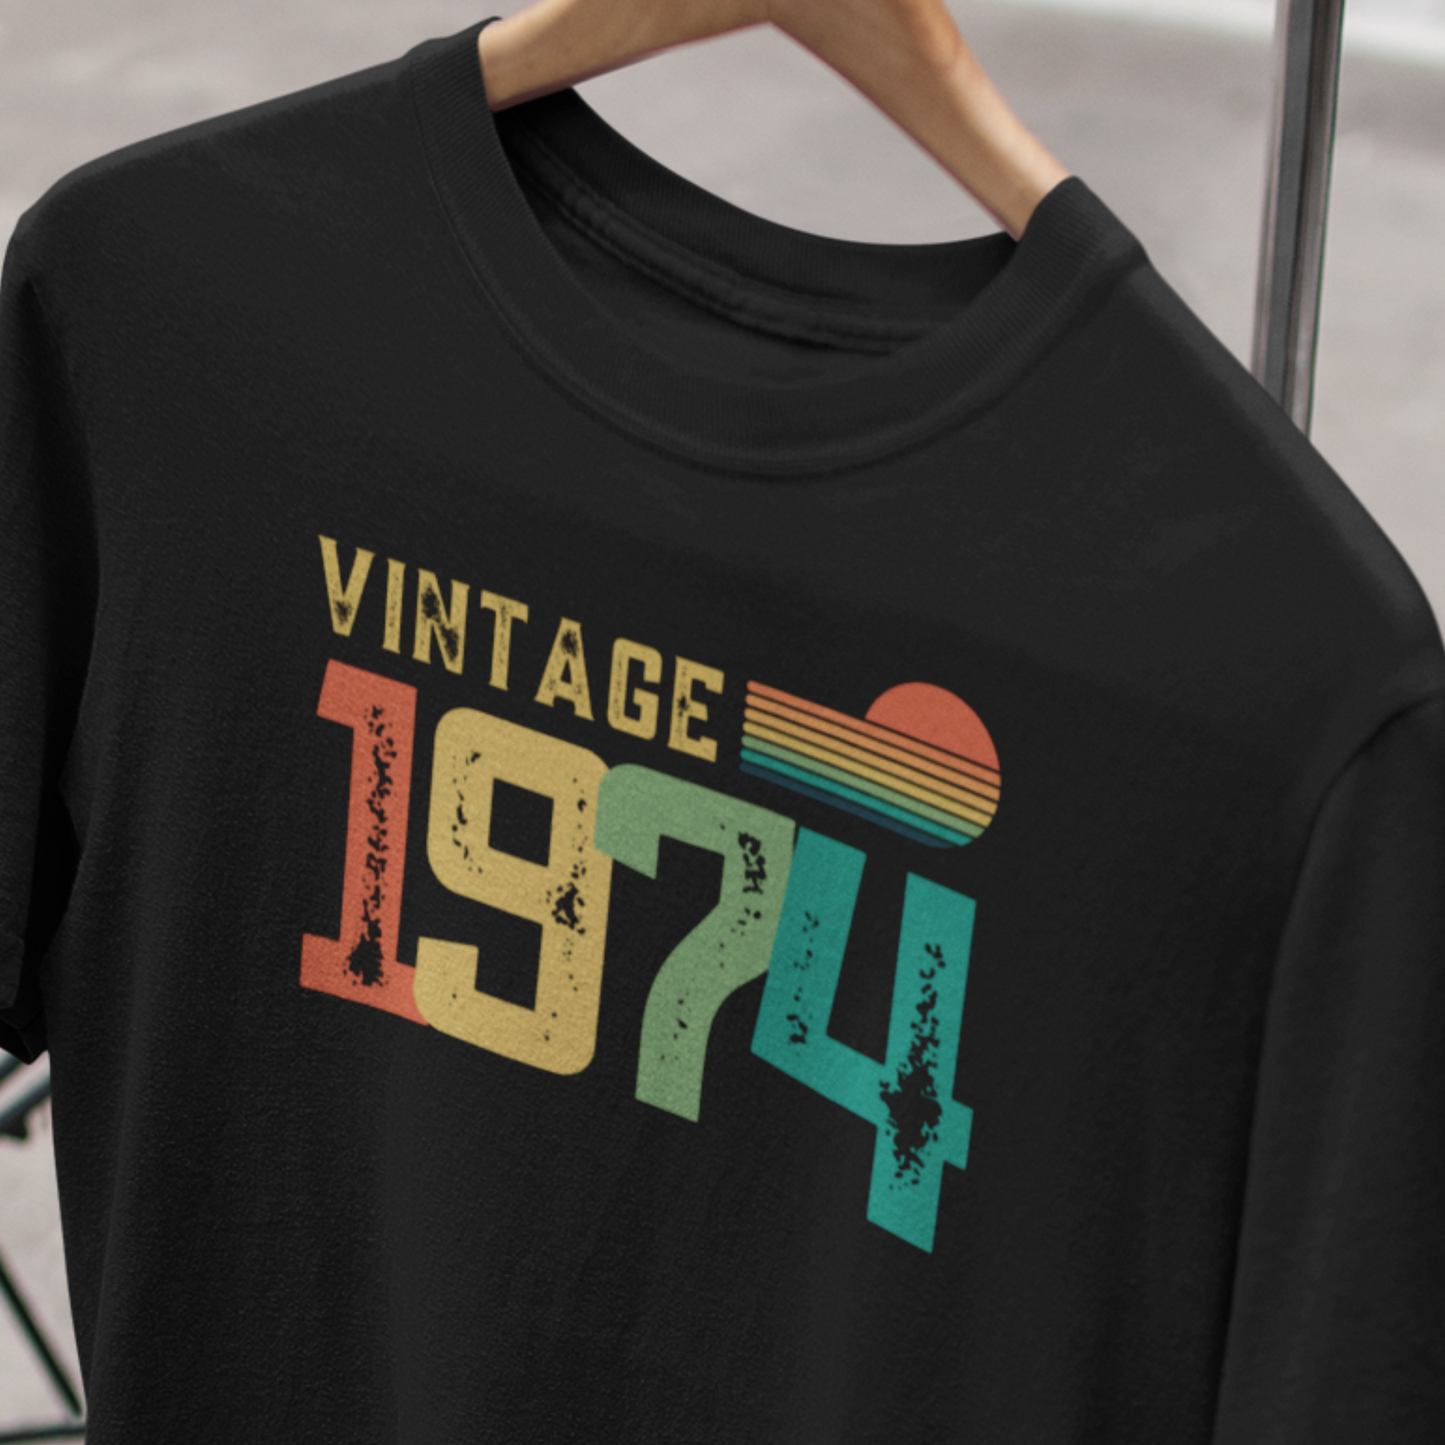 Personalized Birthday Shirt, Custom Year, Vintage, Retro Style Tee, Unique Gift Idea for Him/Her - T-Shirt